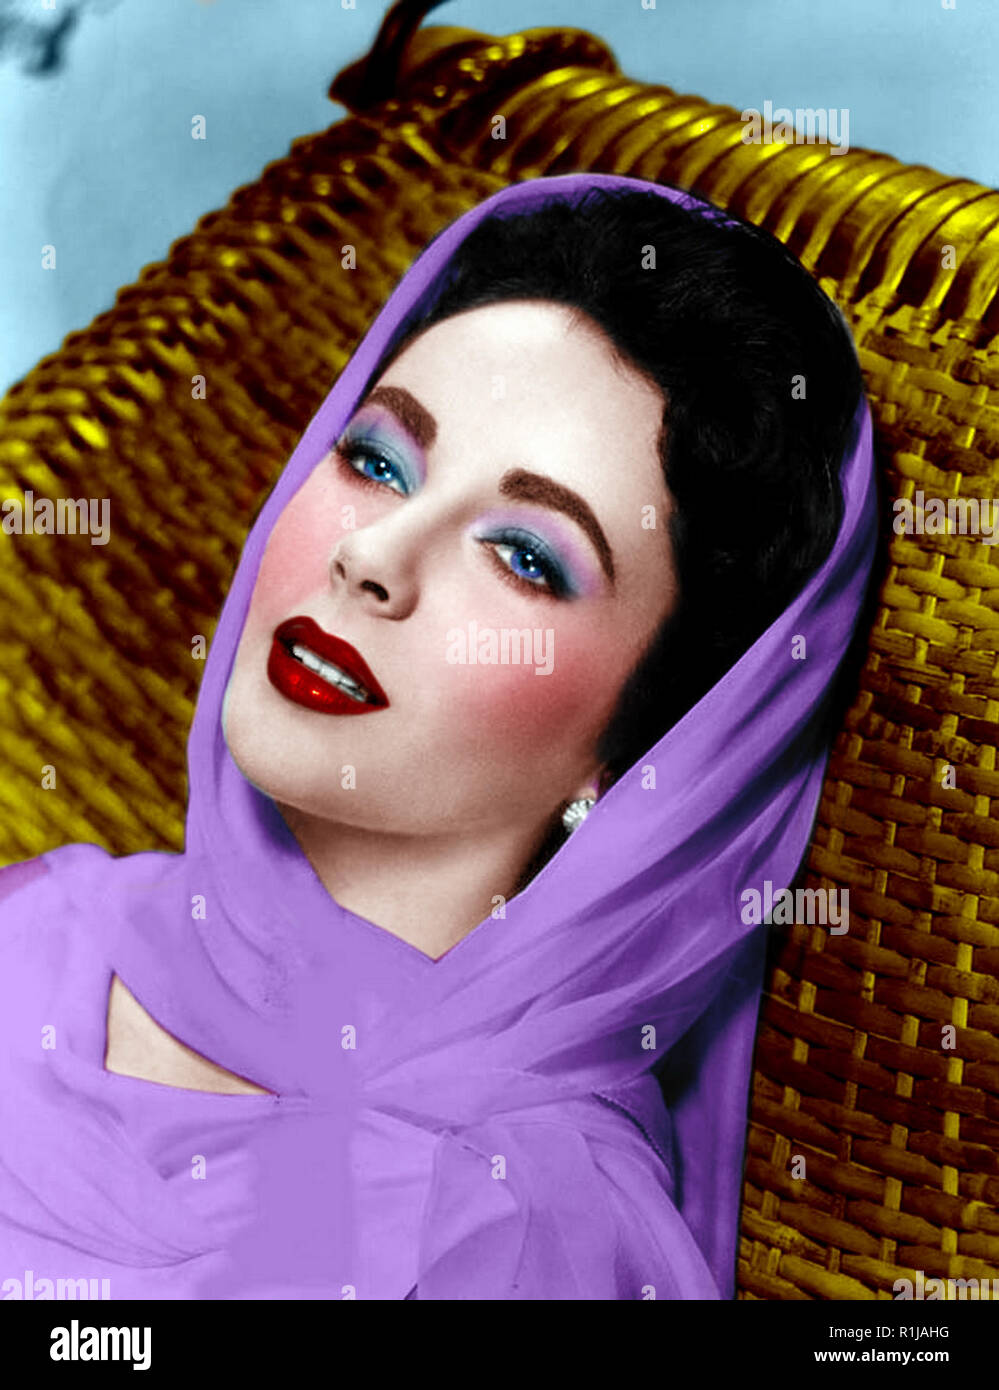 Dame Elizabeth Rosemond Taylor DBE (February 27, 1932 ñ March 23, 2011) was a British-born American actress, businesswoman, and humanitarian. She began her career as a child actress in the early 1940s, and was one of the most popular stars of classical Hollywood cinema in the 1950s. She continued her career successfully into the 1960s, and remained a well-known public figure for the rest of her life. In 1999, the American Film Institute named her the seventh-greatest female screen legend. Credit: Hollywood Photo Archive / MediaPunch Stock Photo